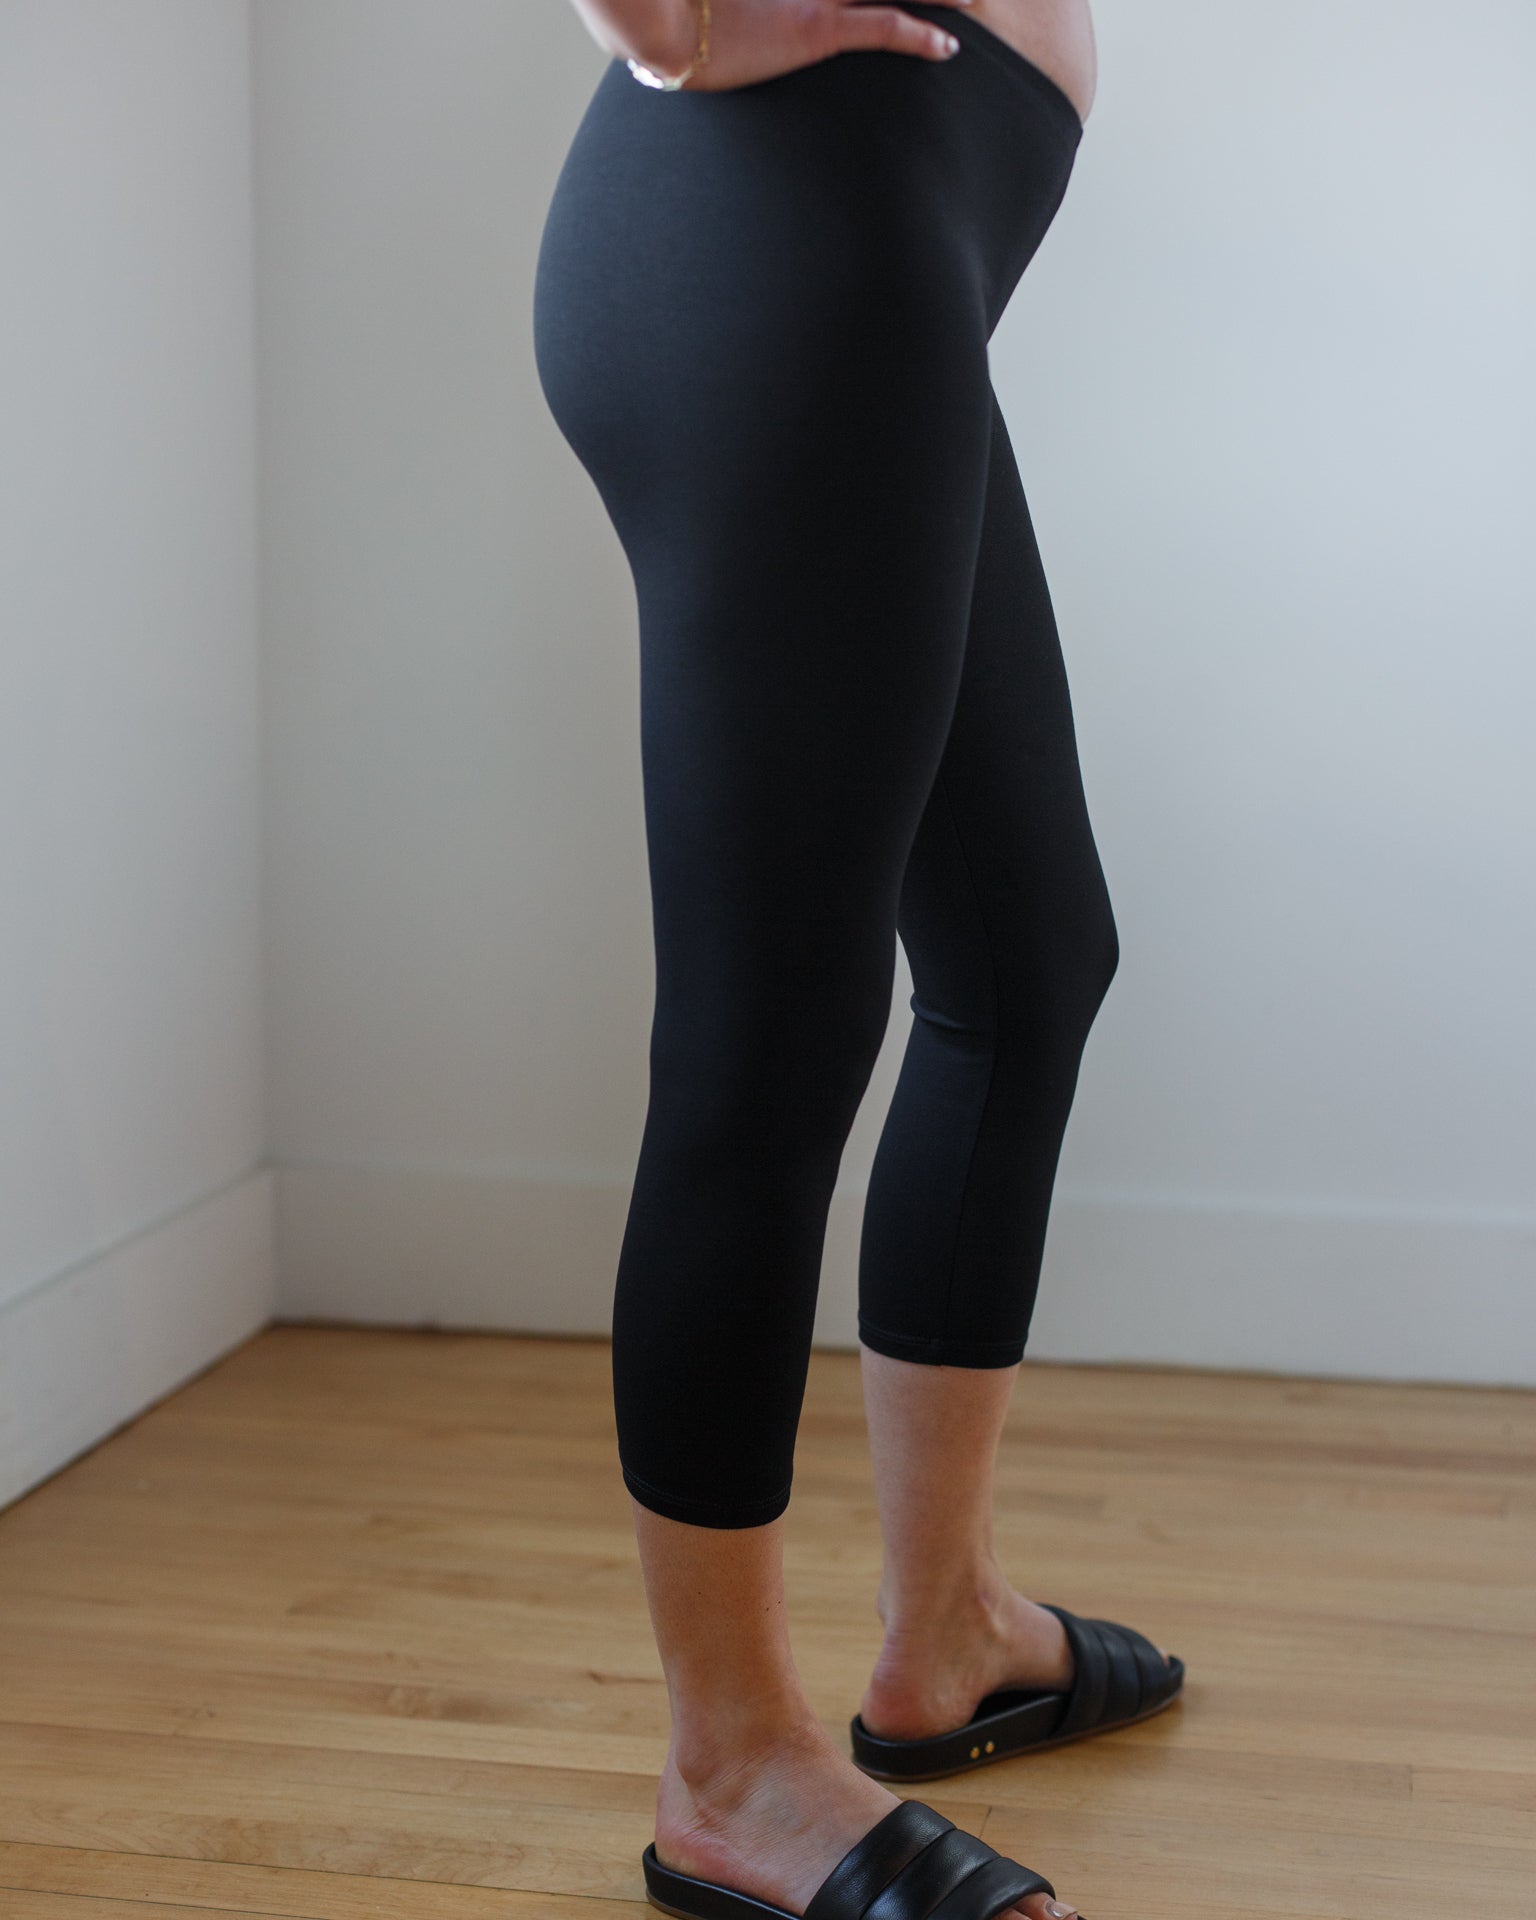 https://www.blissboutiques.com/cdn/shop/products/bliss-bouqitues-only-hearts-cropped-legging-in-black-30856142422113.jpg?v=1671859148